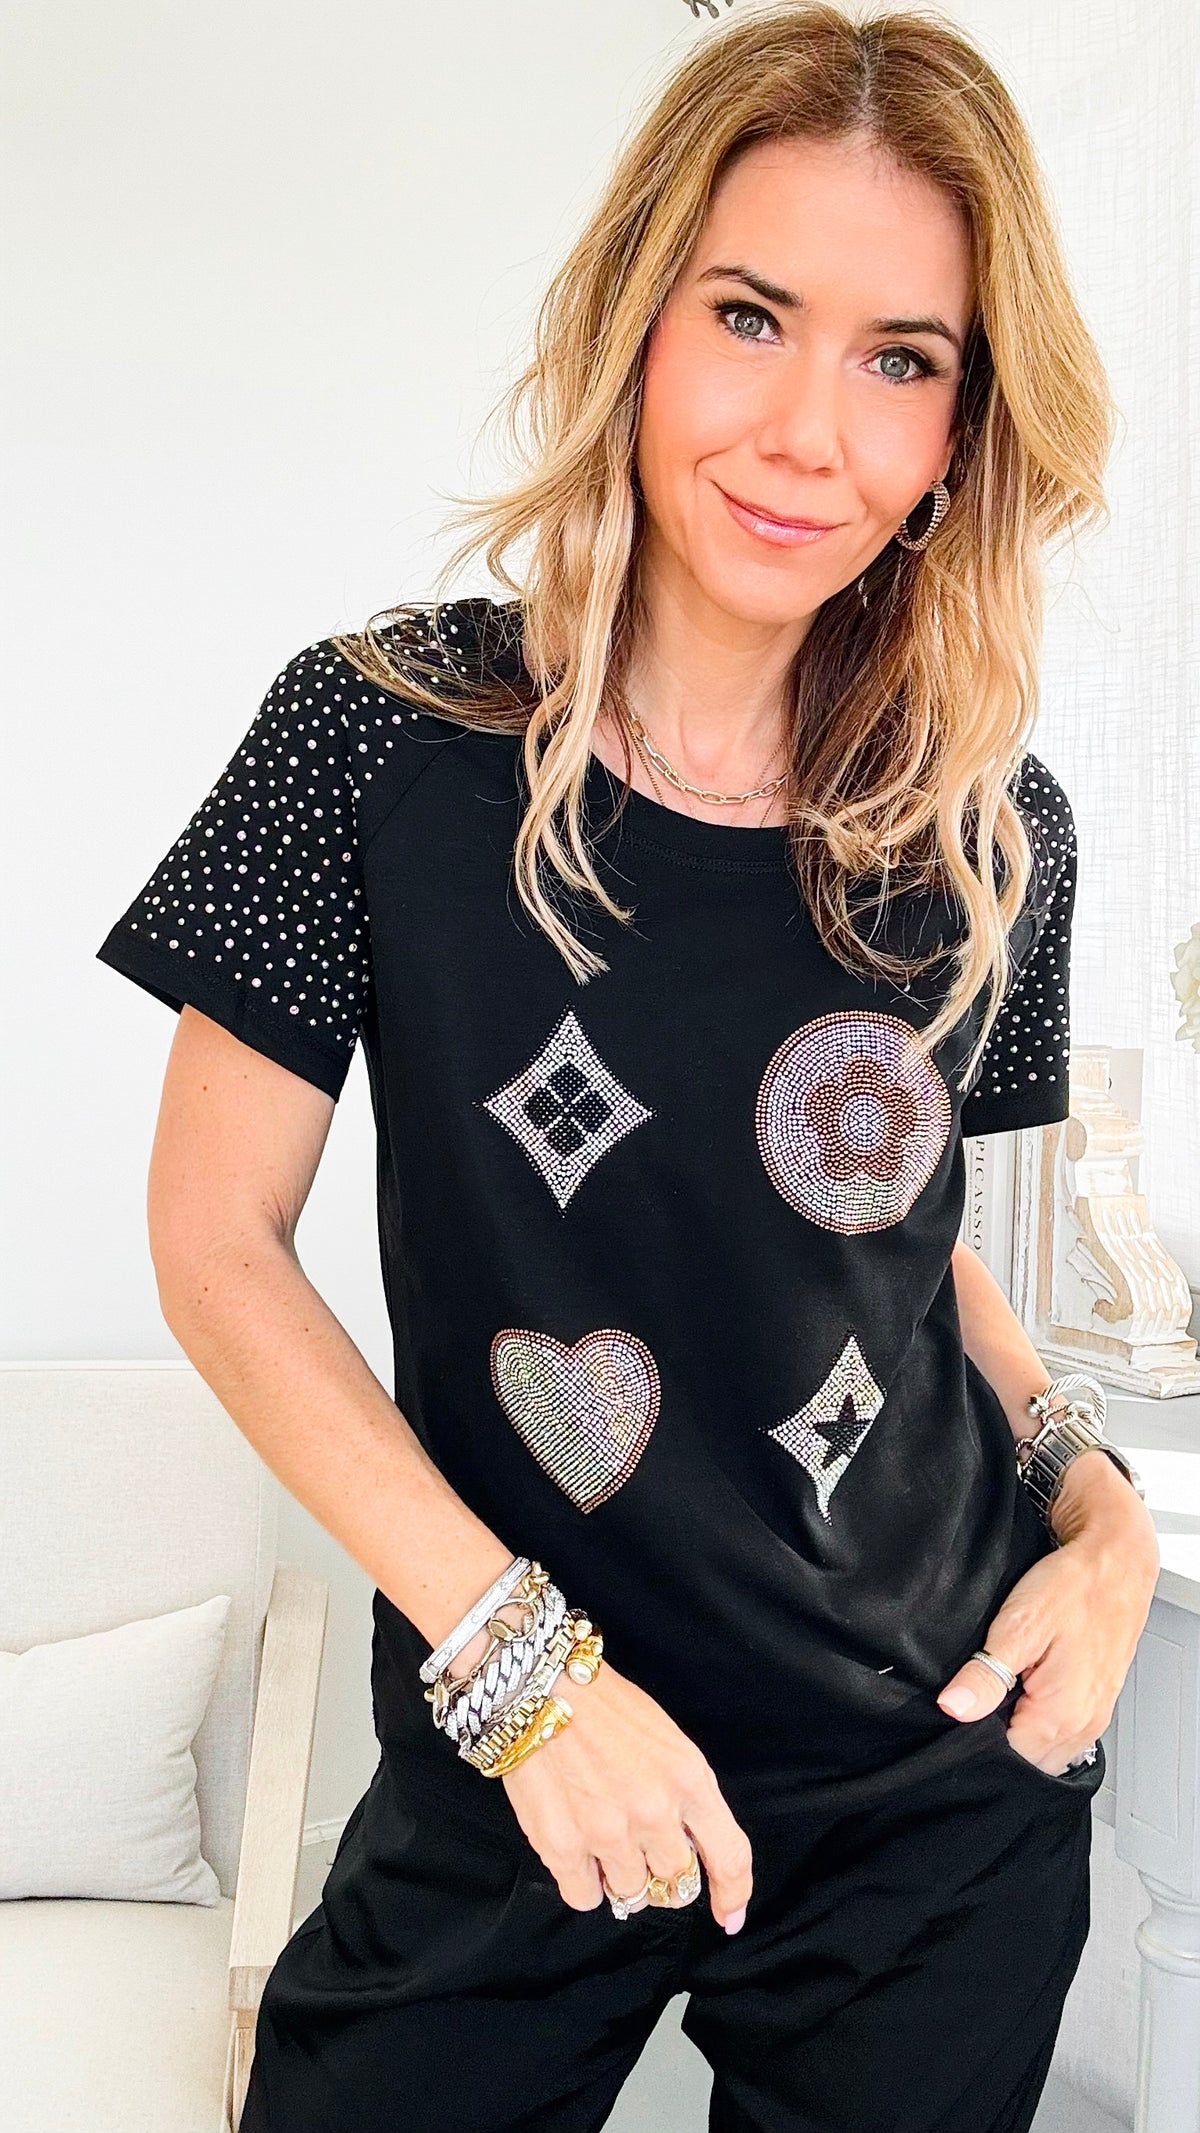 Clover and Flower Rhinestone Graphic Top - Black-110 Short Sleeve Tops-in2you-Coastal Bloom Boutique, find the trendiest versions of the popular styles and looks Located in Indialantic, FL